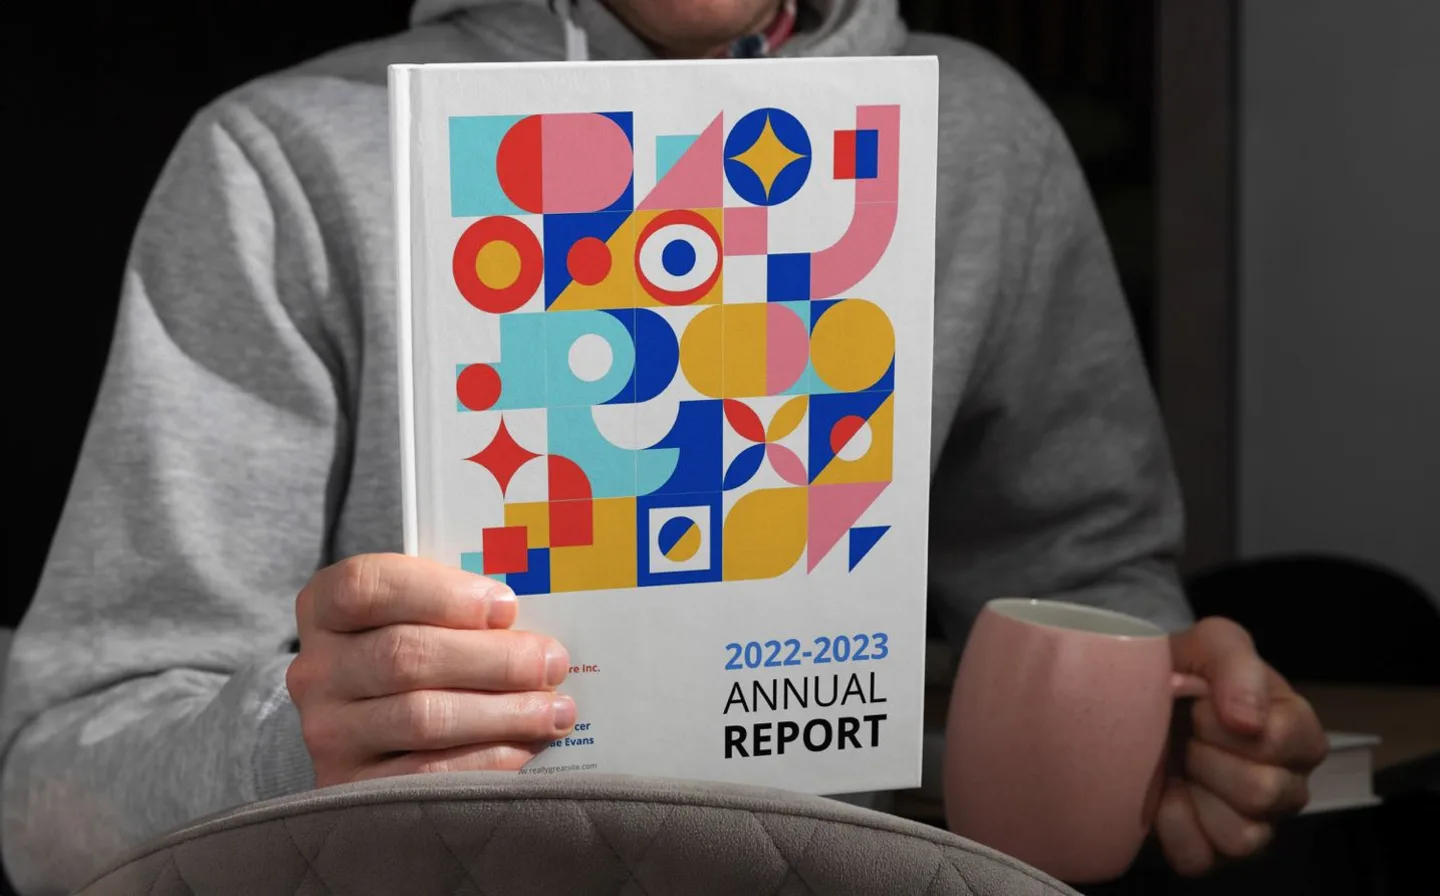 Man holding casebound annual report book